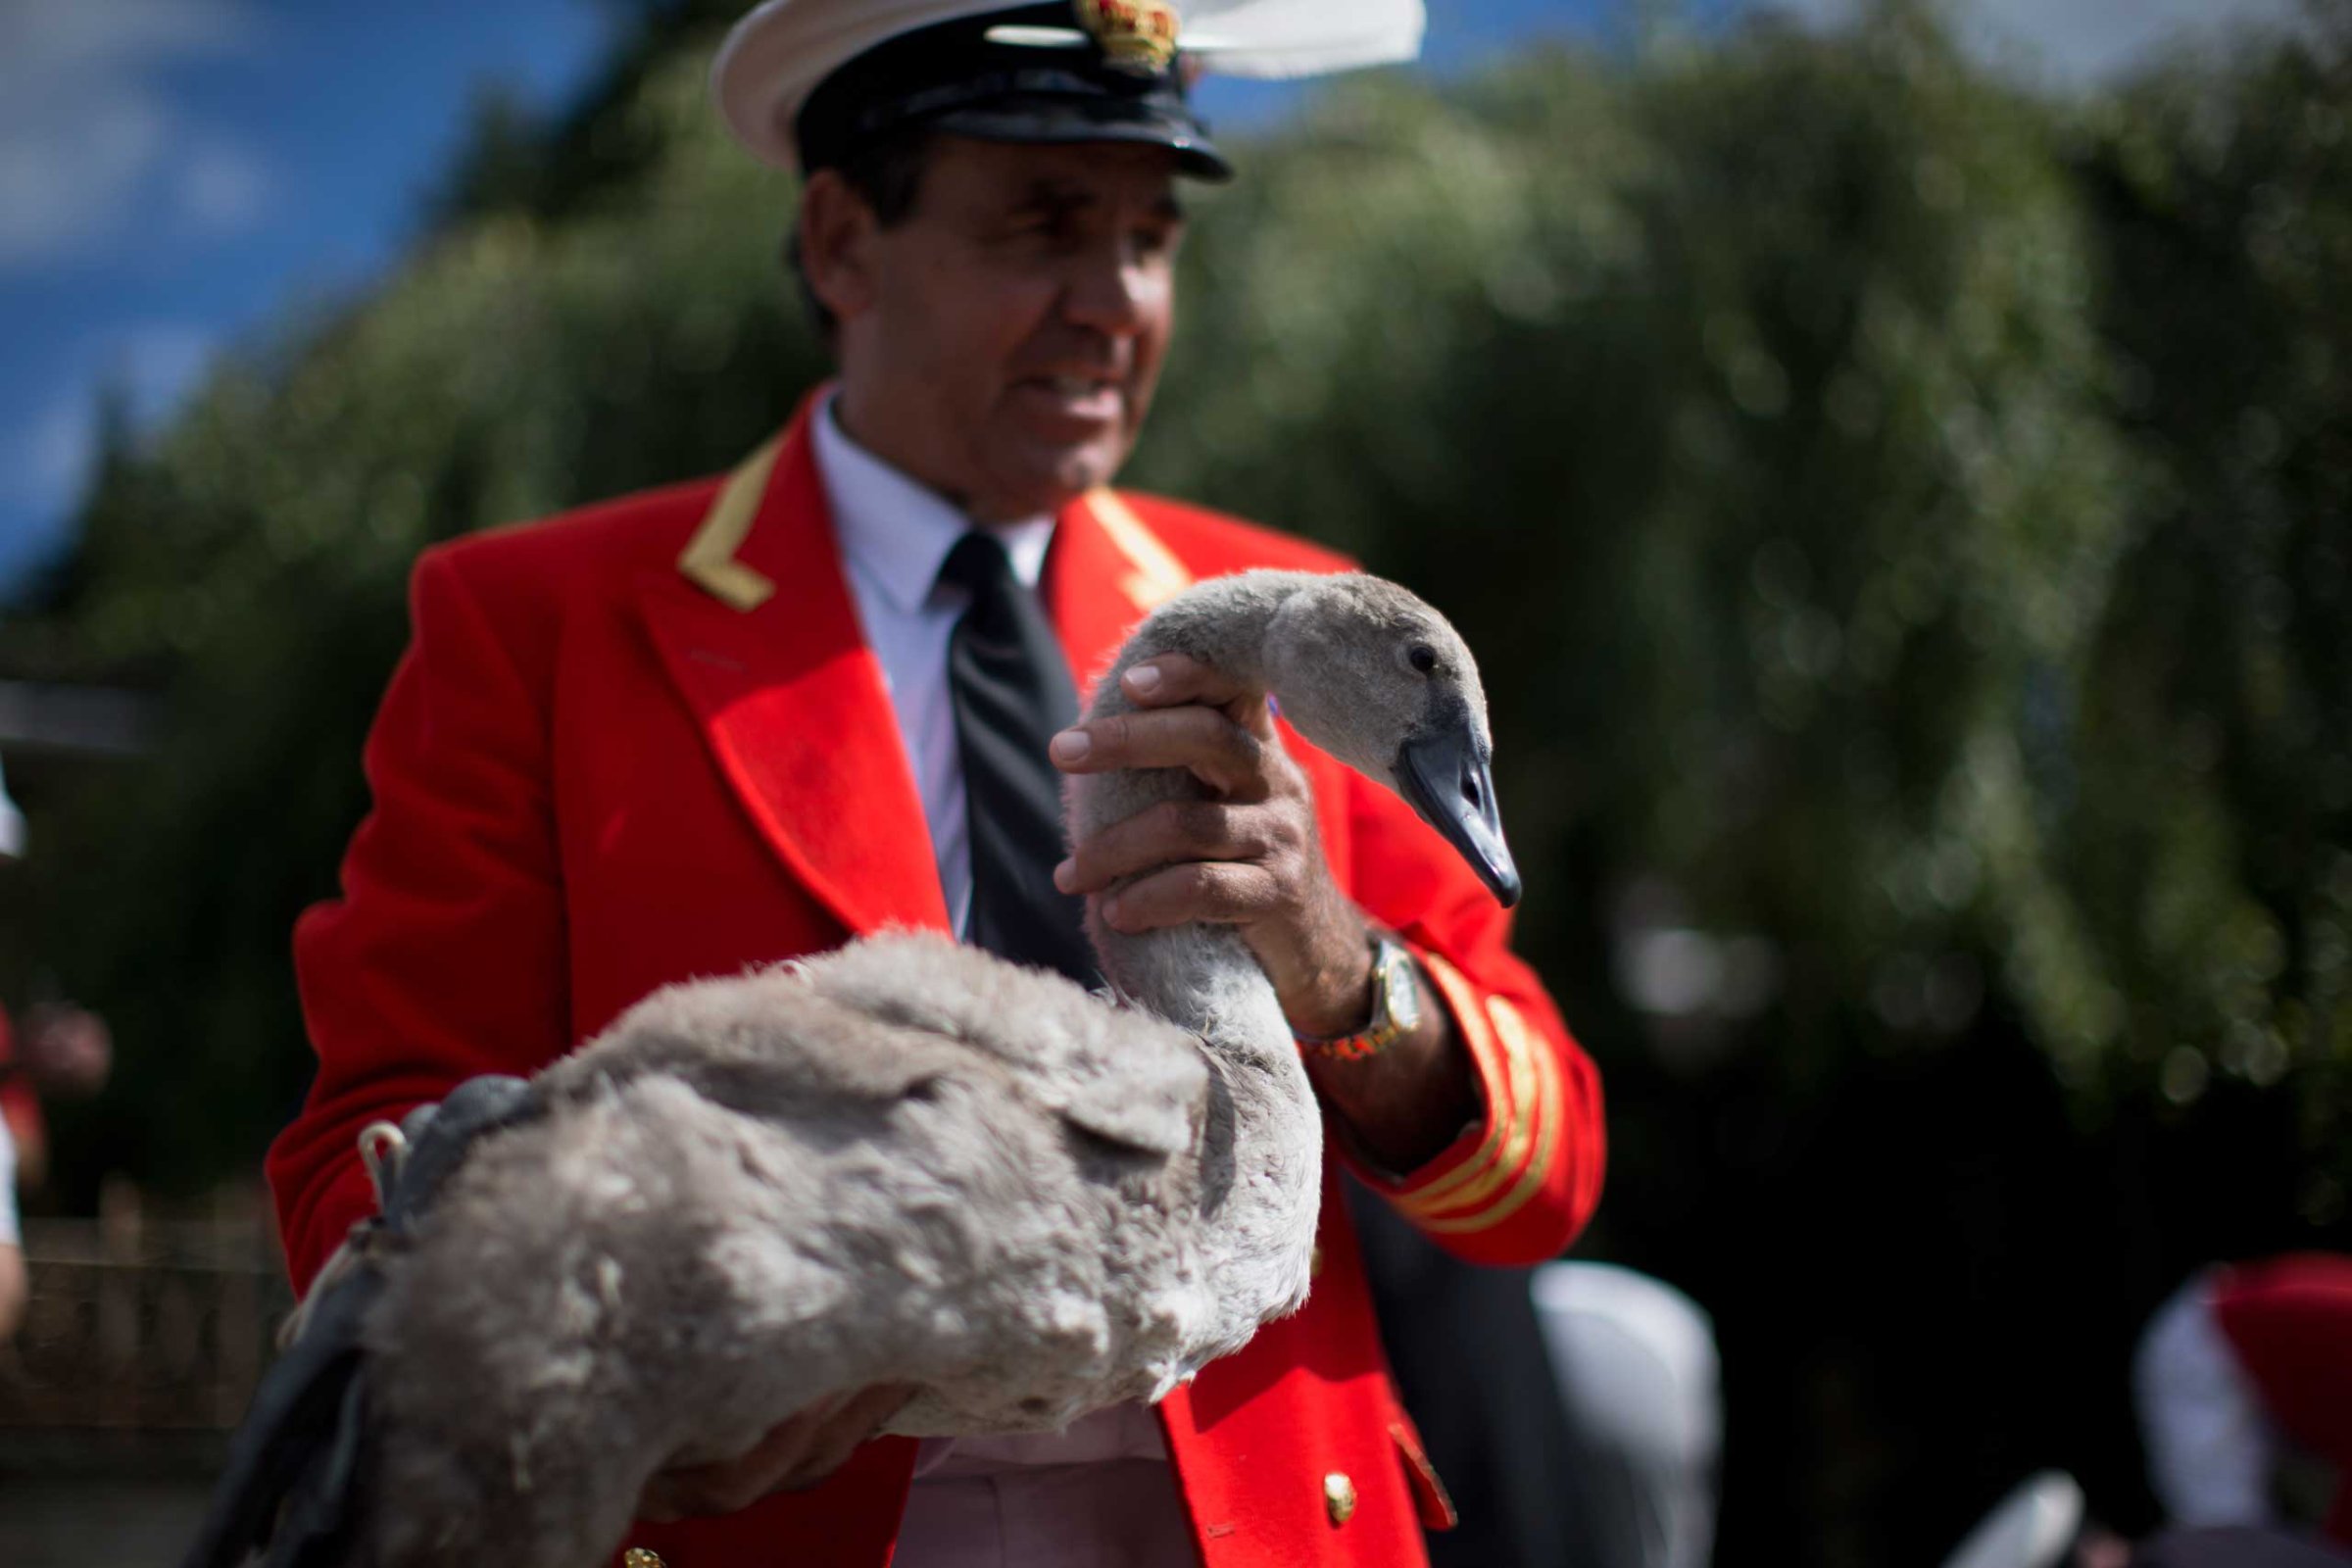 The Queen's Swan Marker David Barber holds a cygnet before releasing it back into the River Thames, after it was counted and checked during the annual "Swan Upping" census in July 2014.